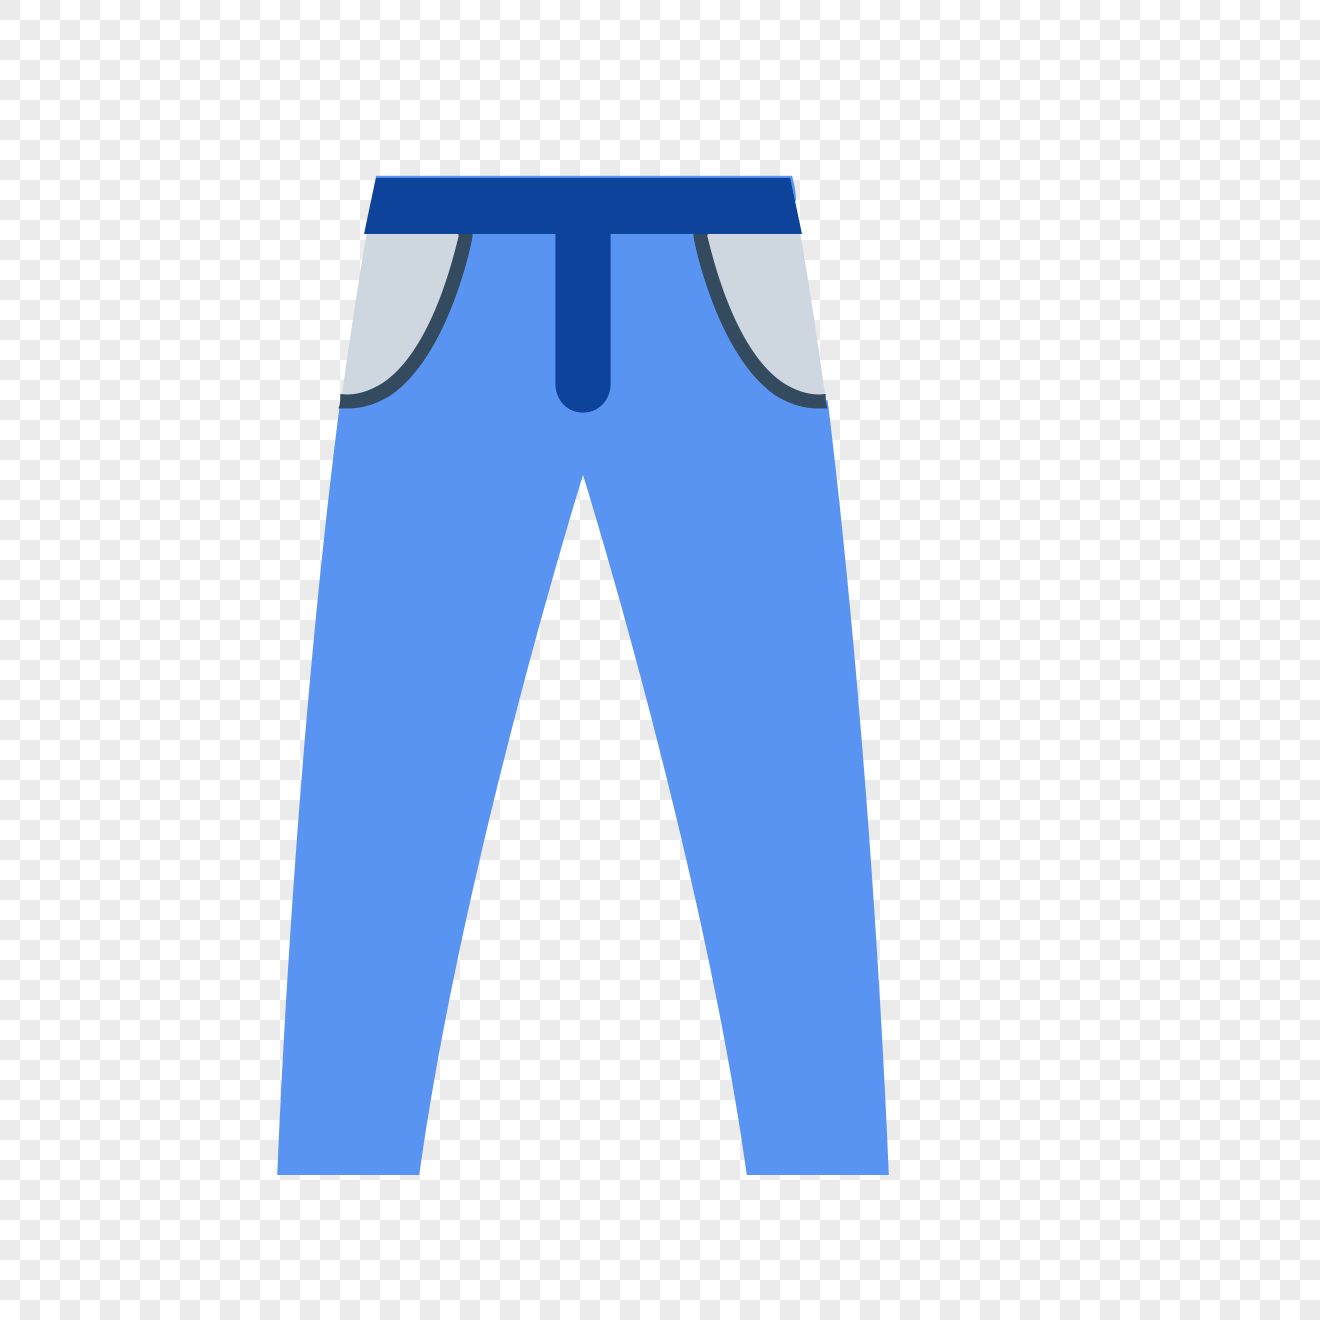 The pants layout | Clipart Panda - Free Clipart Images